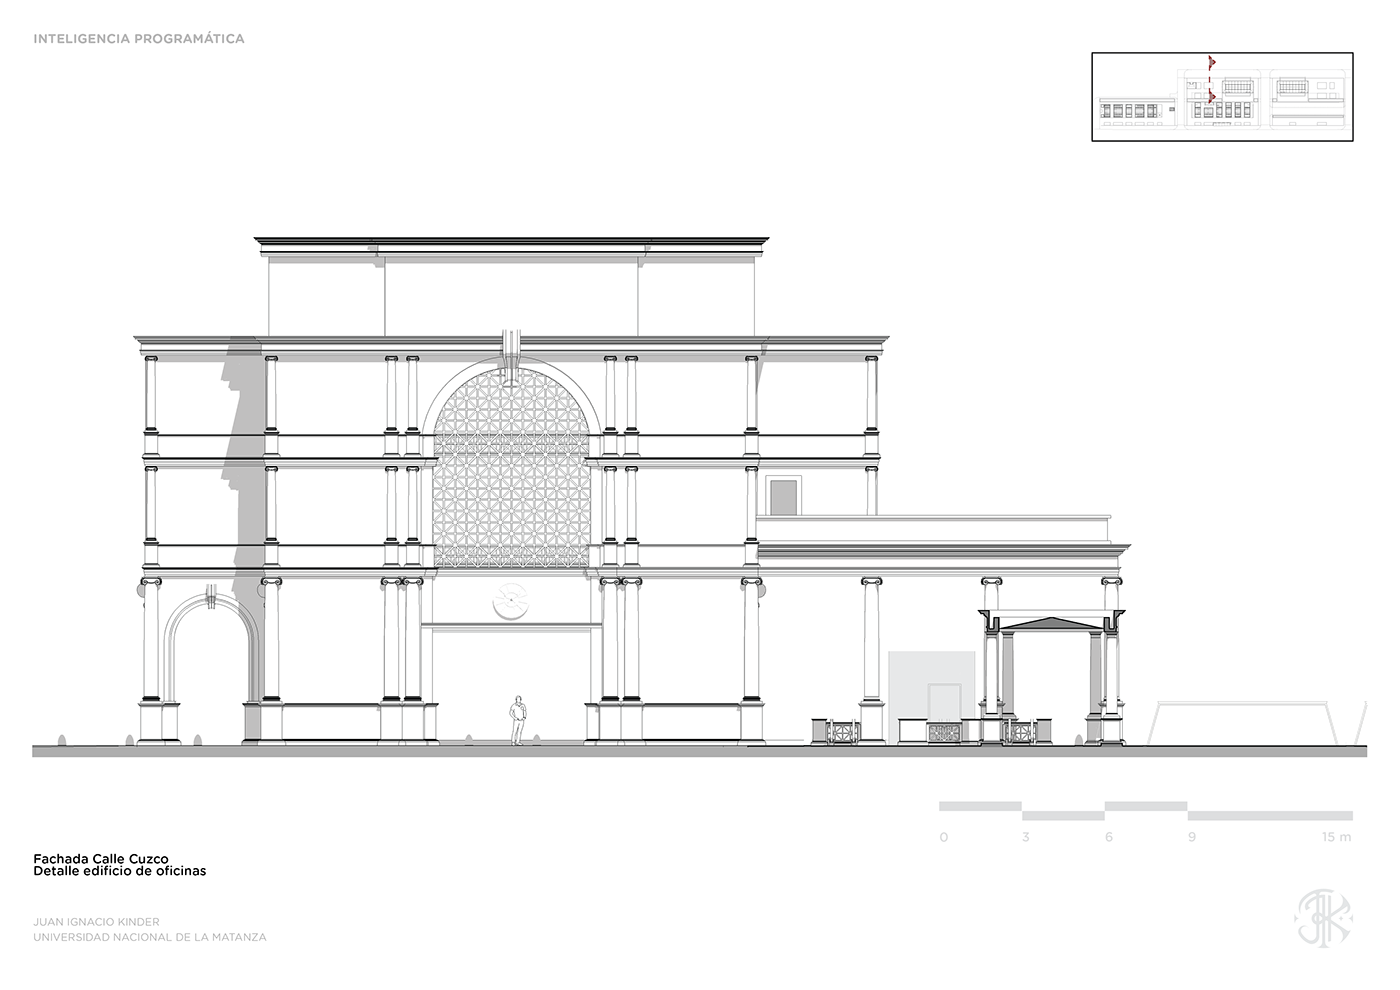 architecture building Classical classical architecture plans Render thesis train station visualization